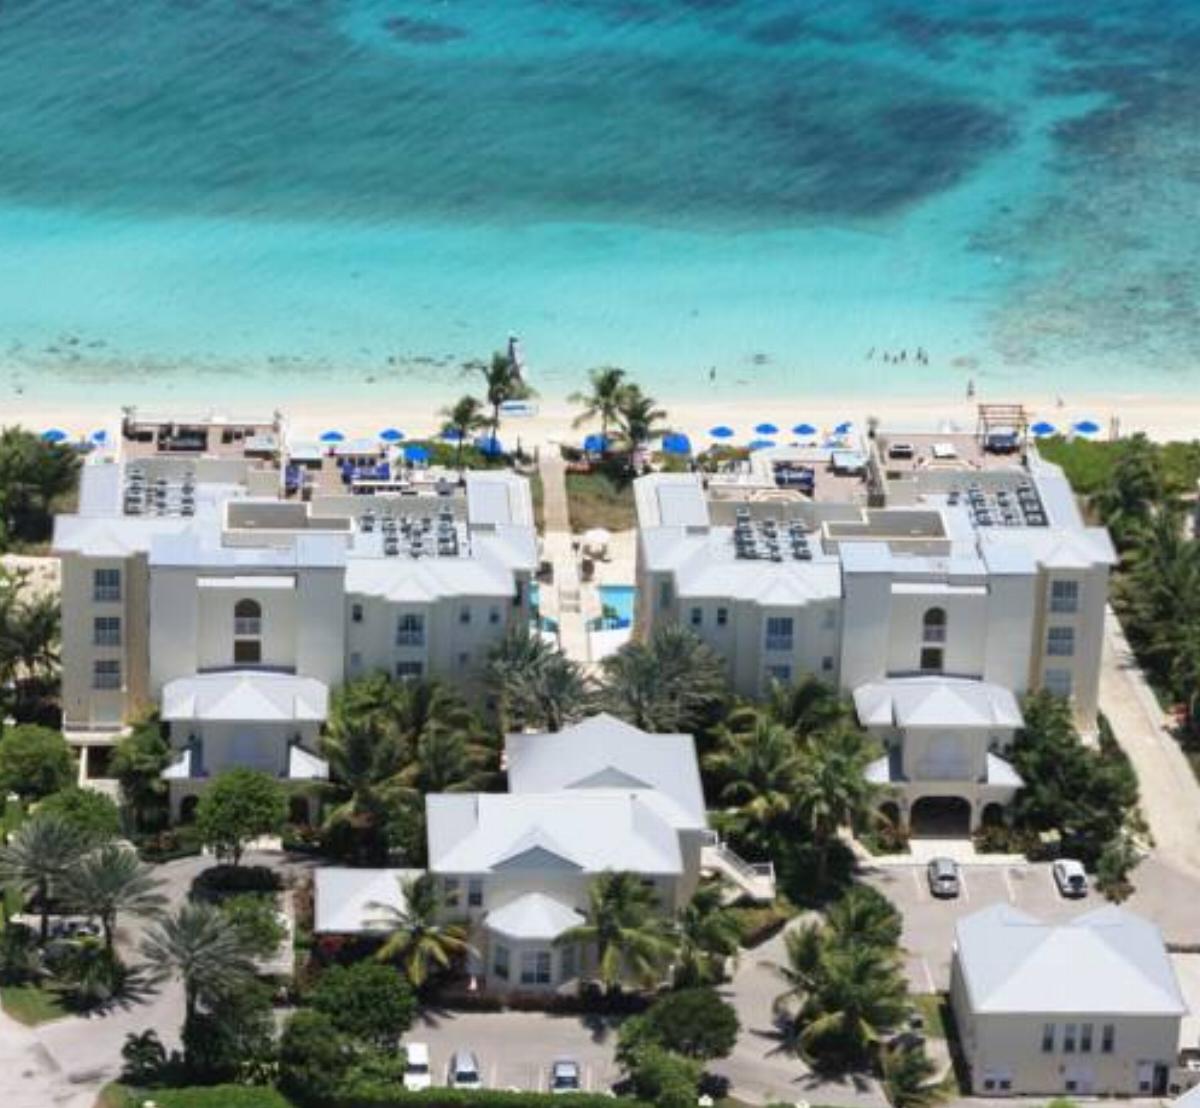 Windsong Resort Hotel Grace Bay Turks and Caicos Islands